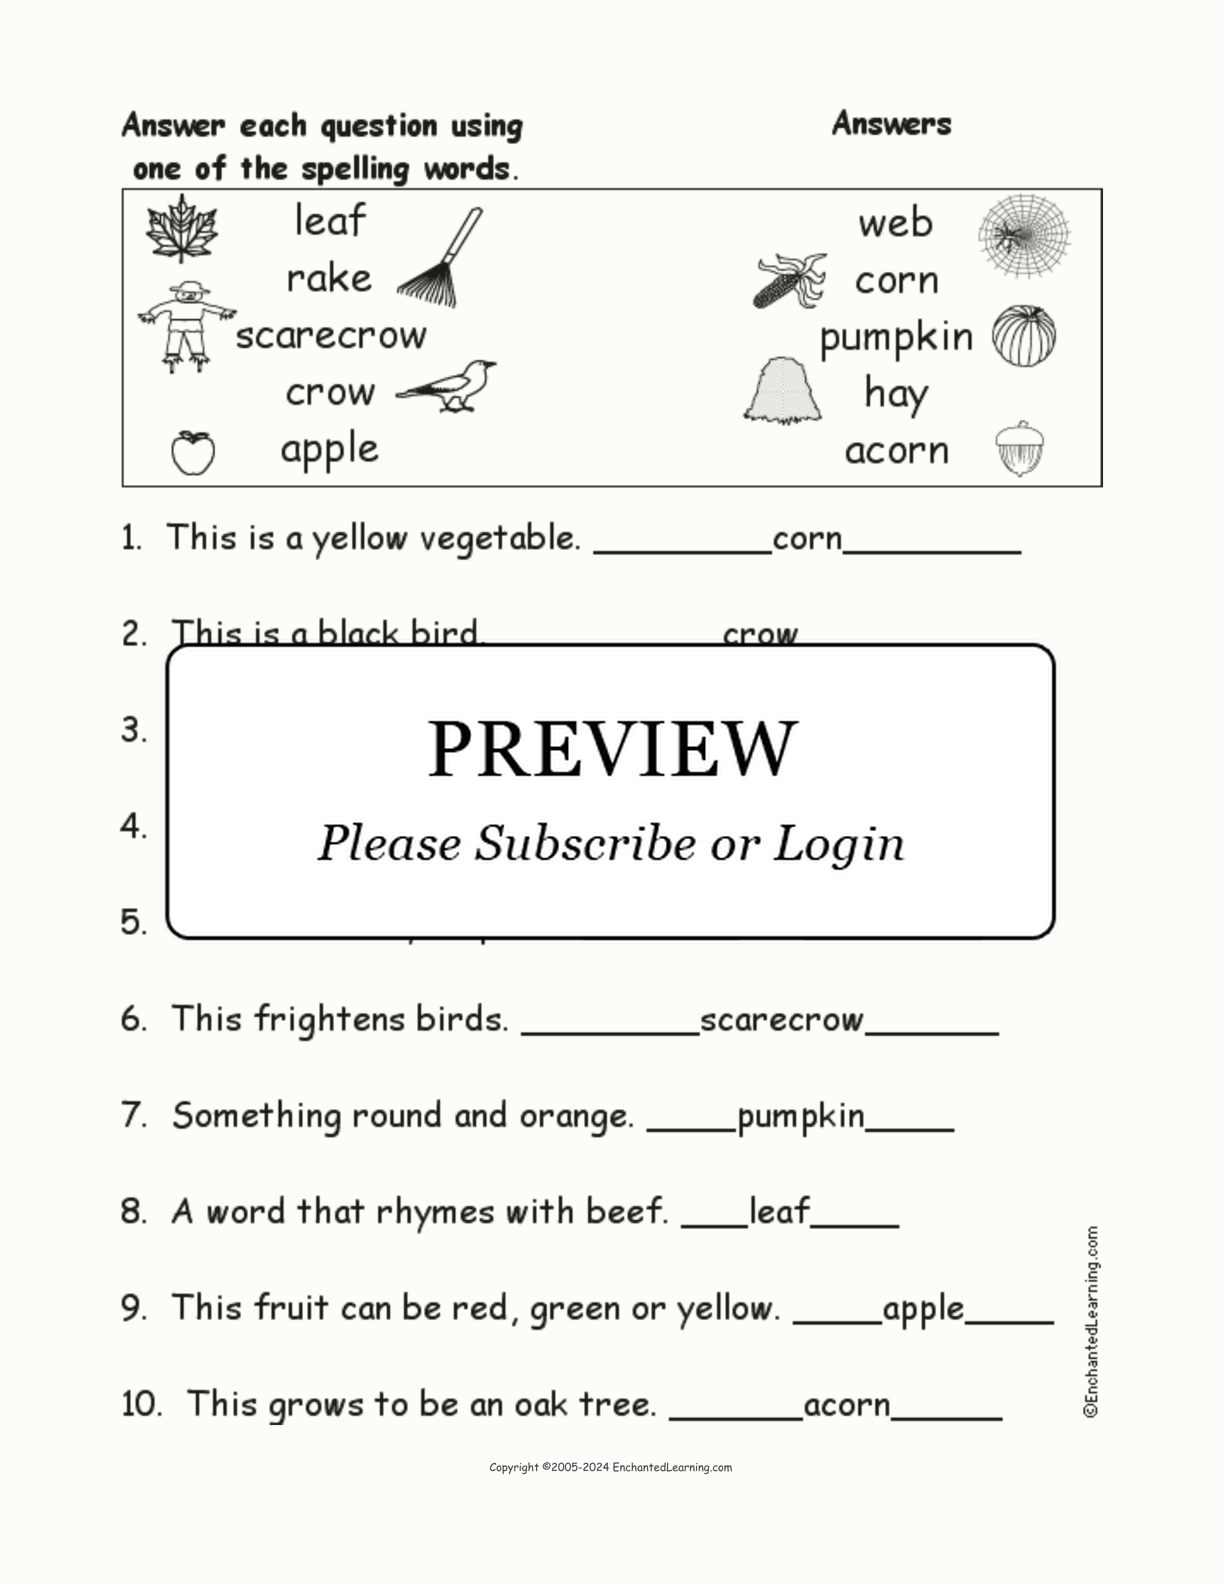 Fall Spelling Word Questions interactive worksheet page 2